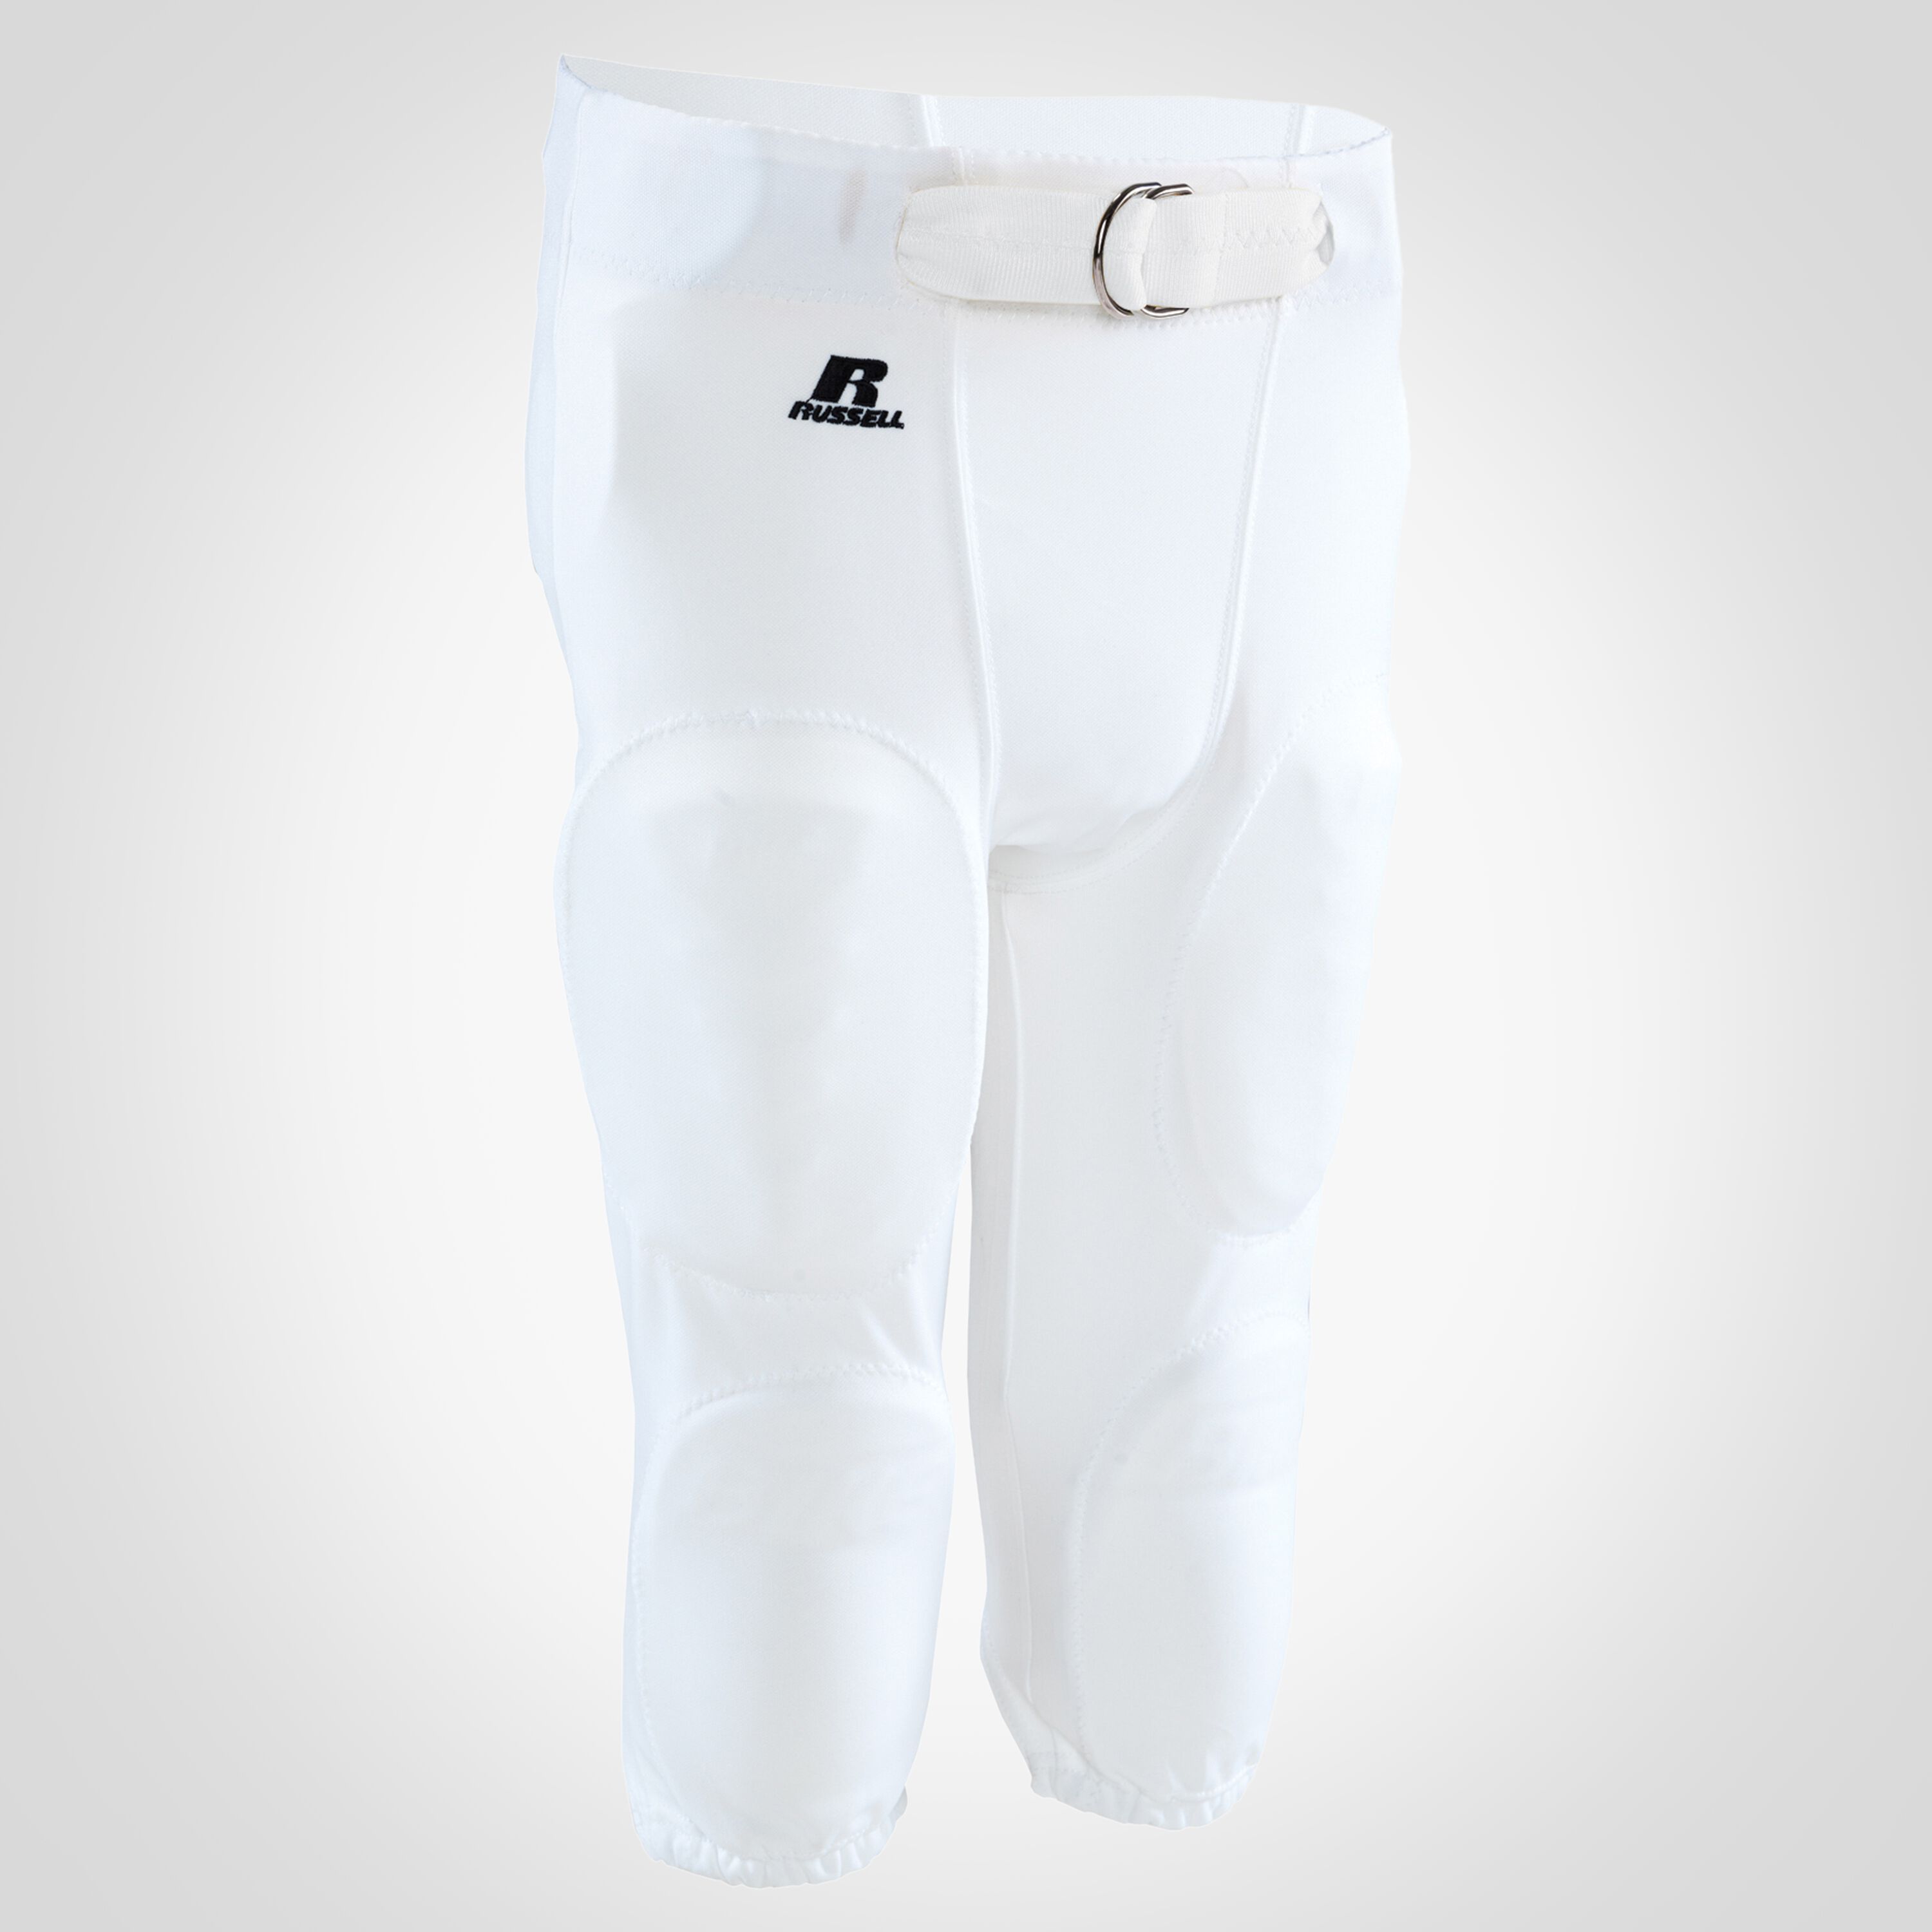 Football Practice Pants Lace Up Fly Adult White Russell Athletic 11936MK 